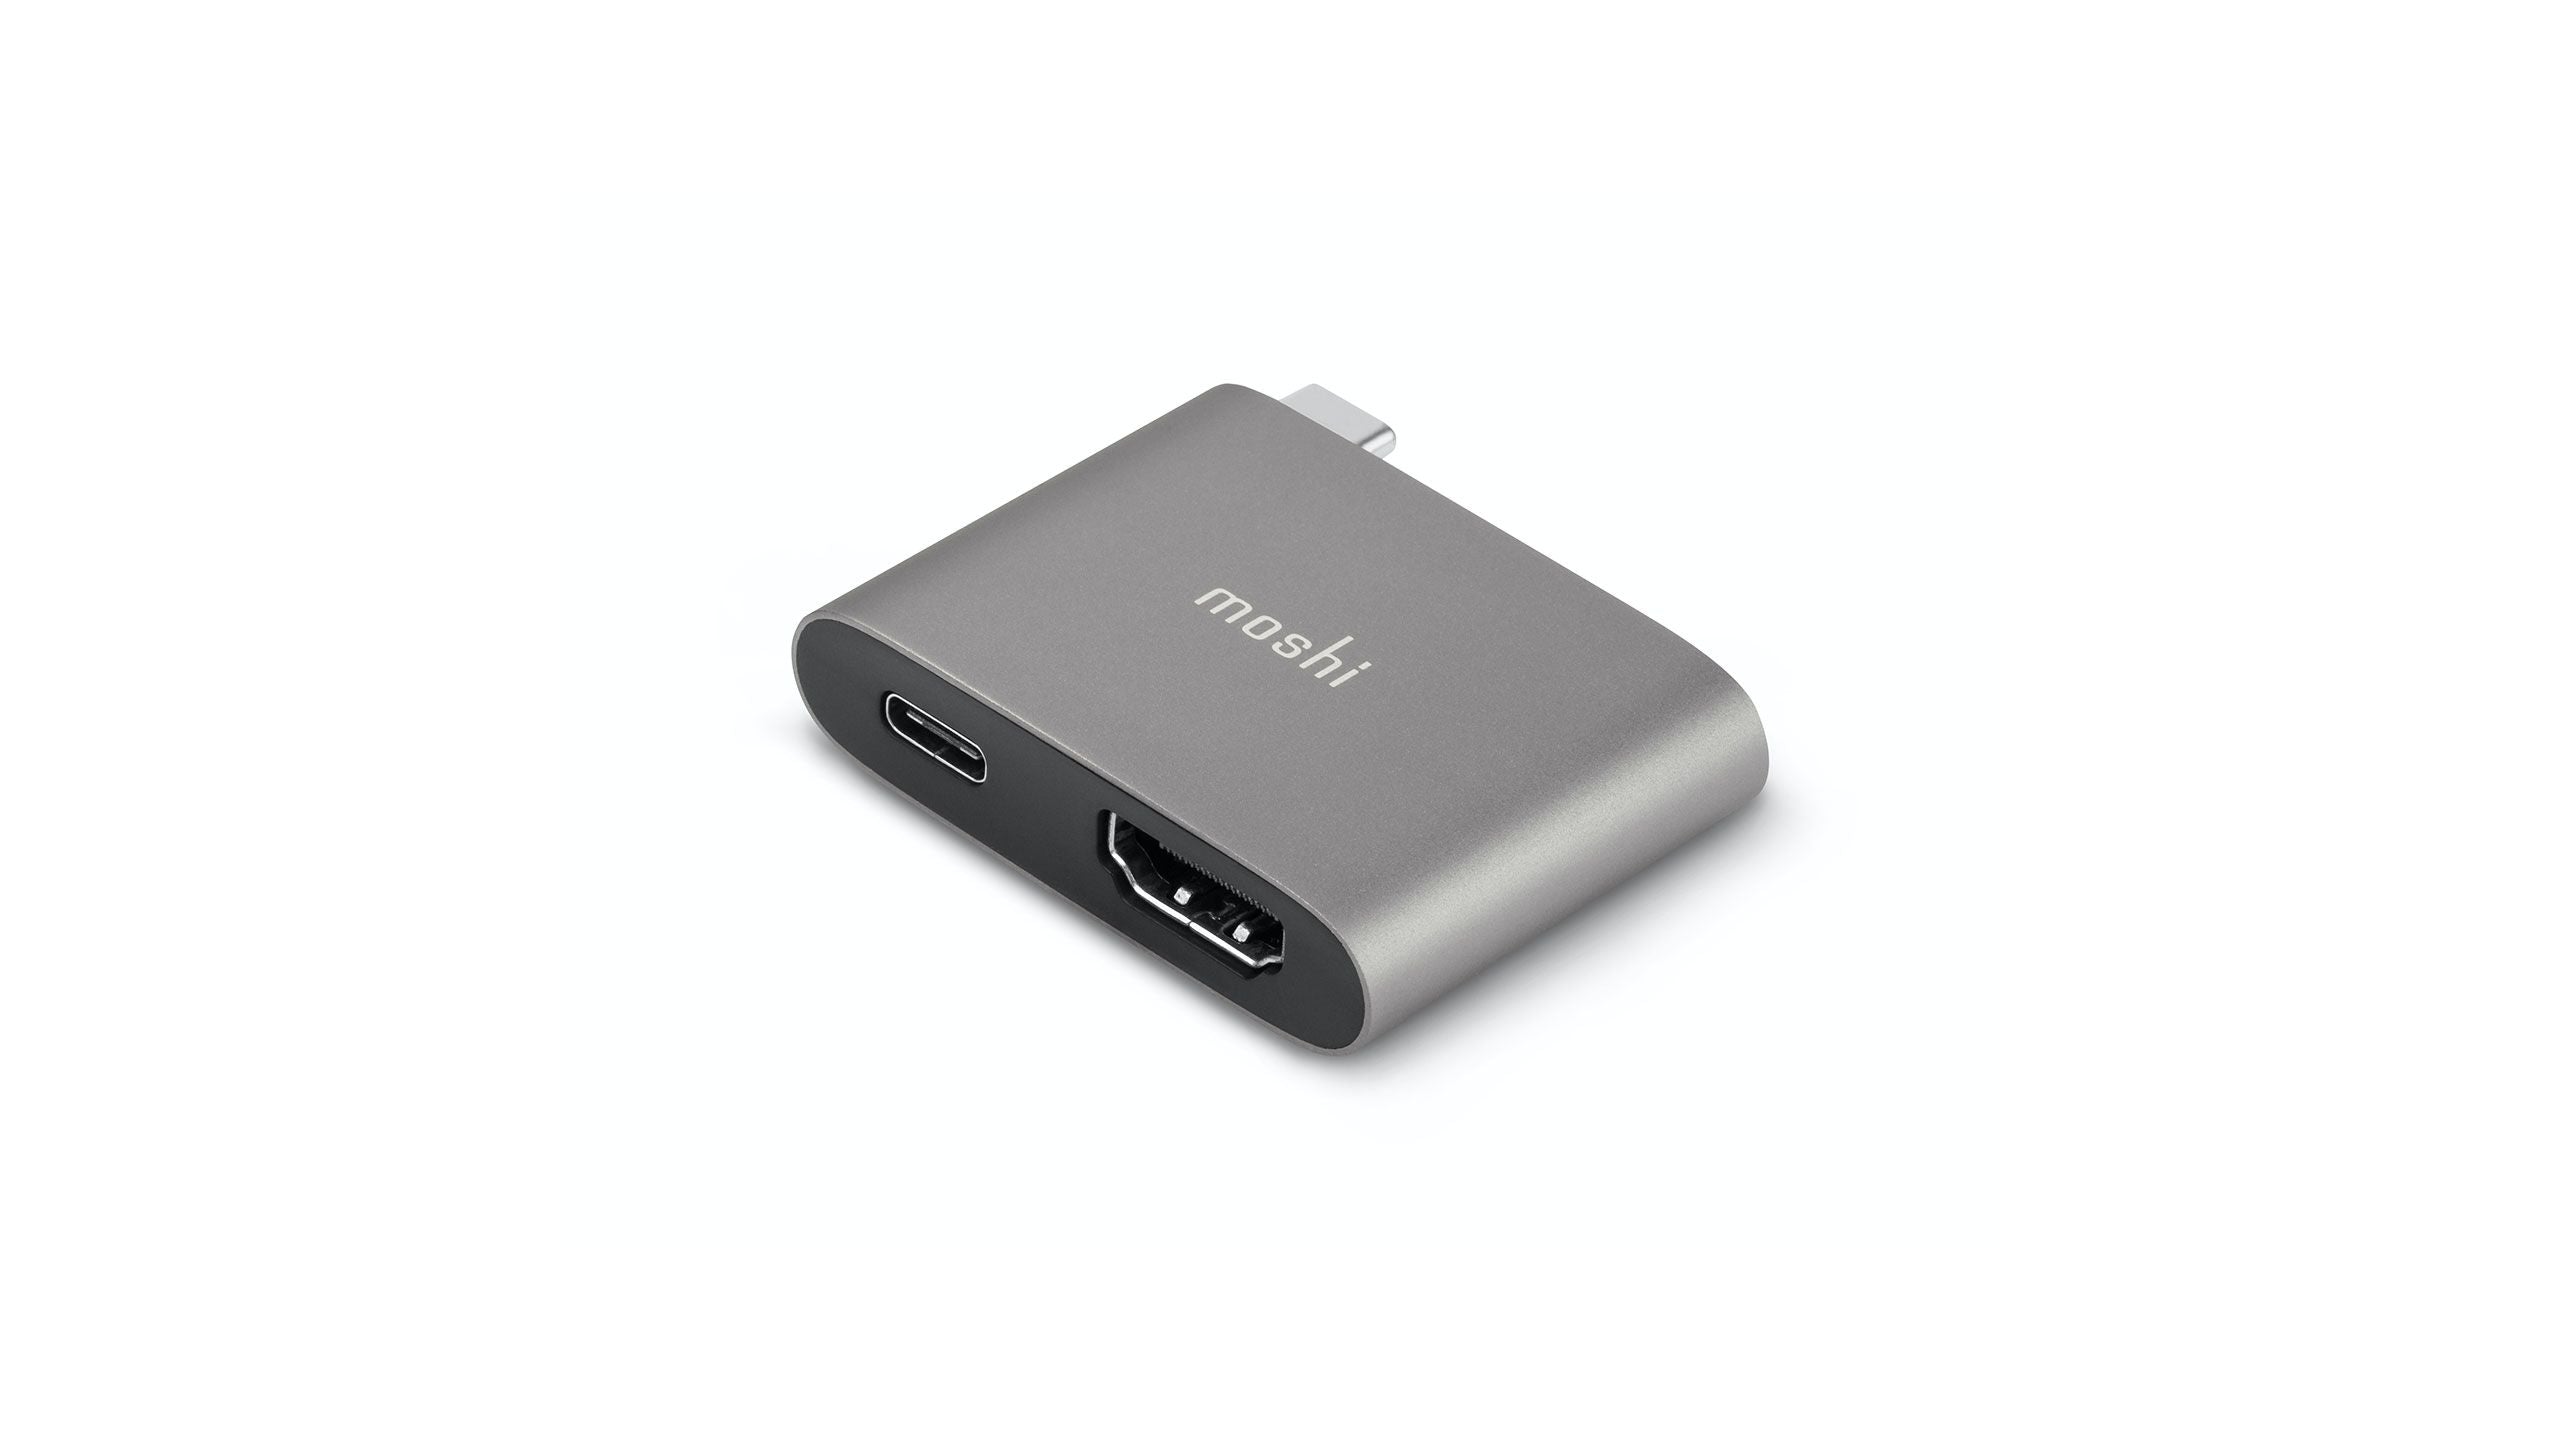 Compact USB-C to HDMI Adapter with HDR and USB PD Pass-through